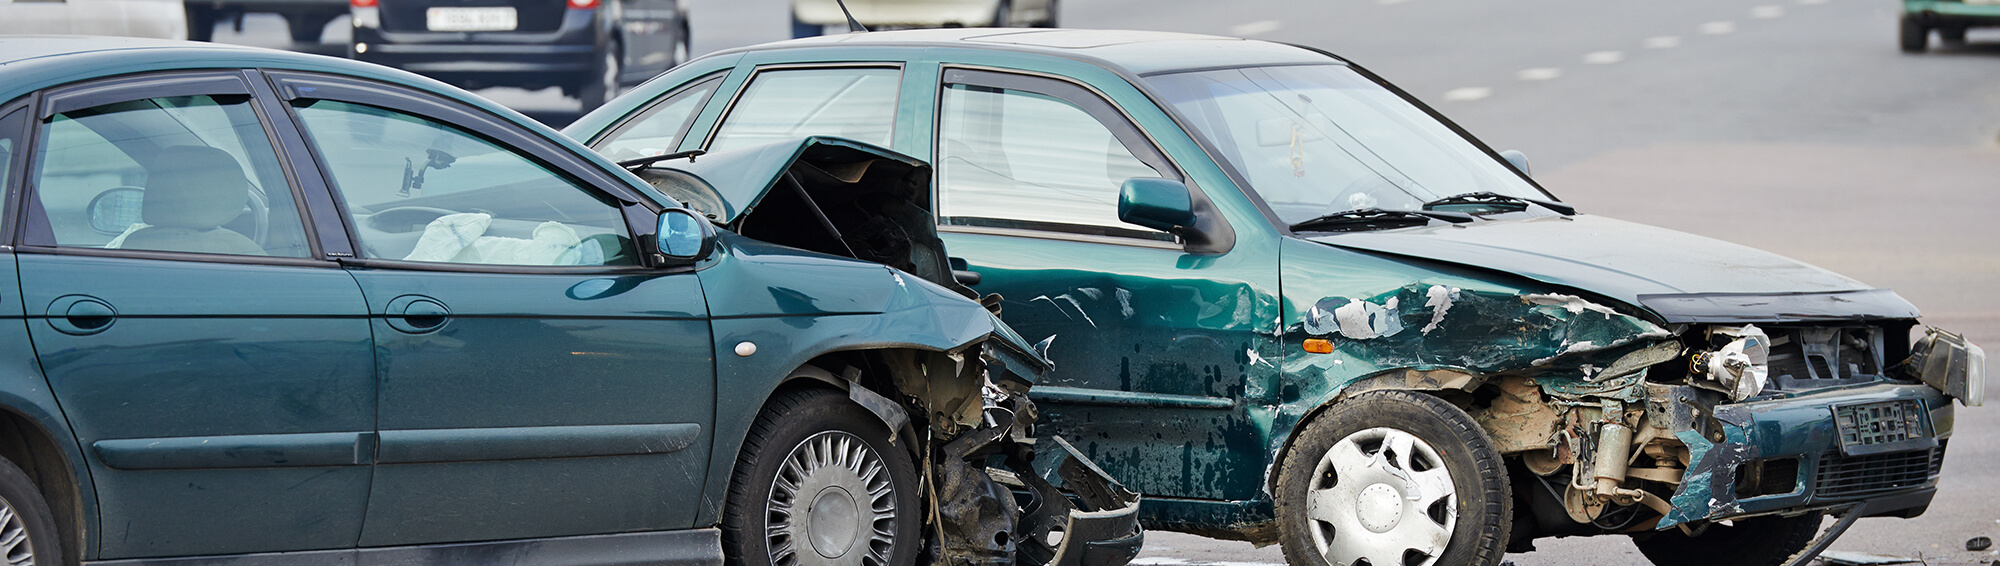 Injured in a Parking Lot? You May Be Eligible for Compensation.